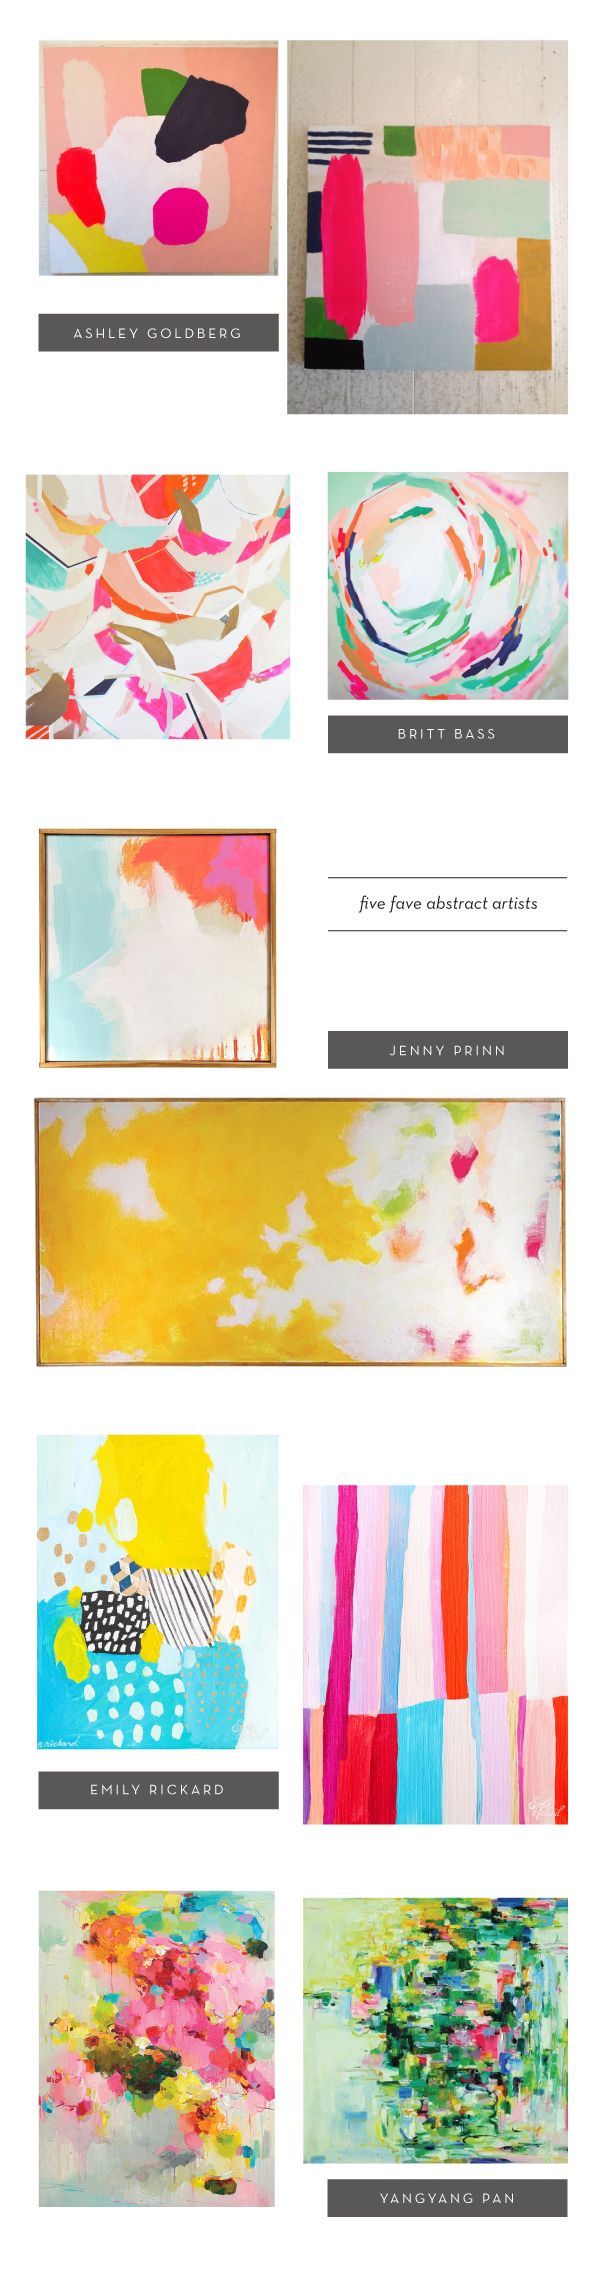 five favorite abstract artists – i want one of each of these in my home